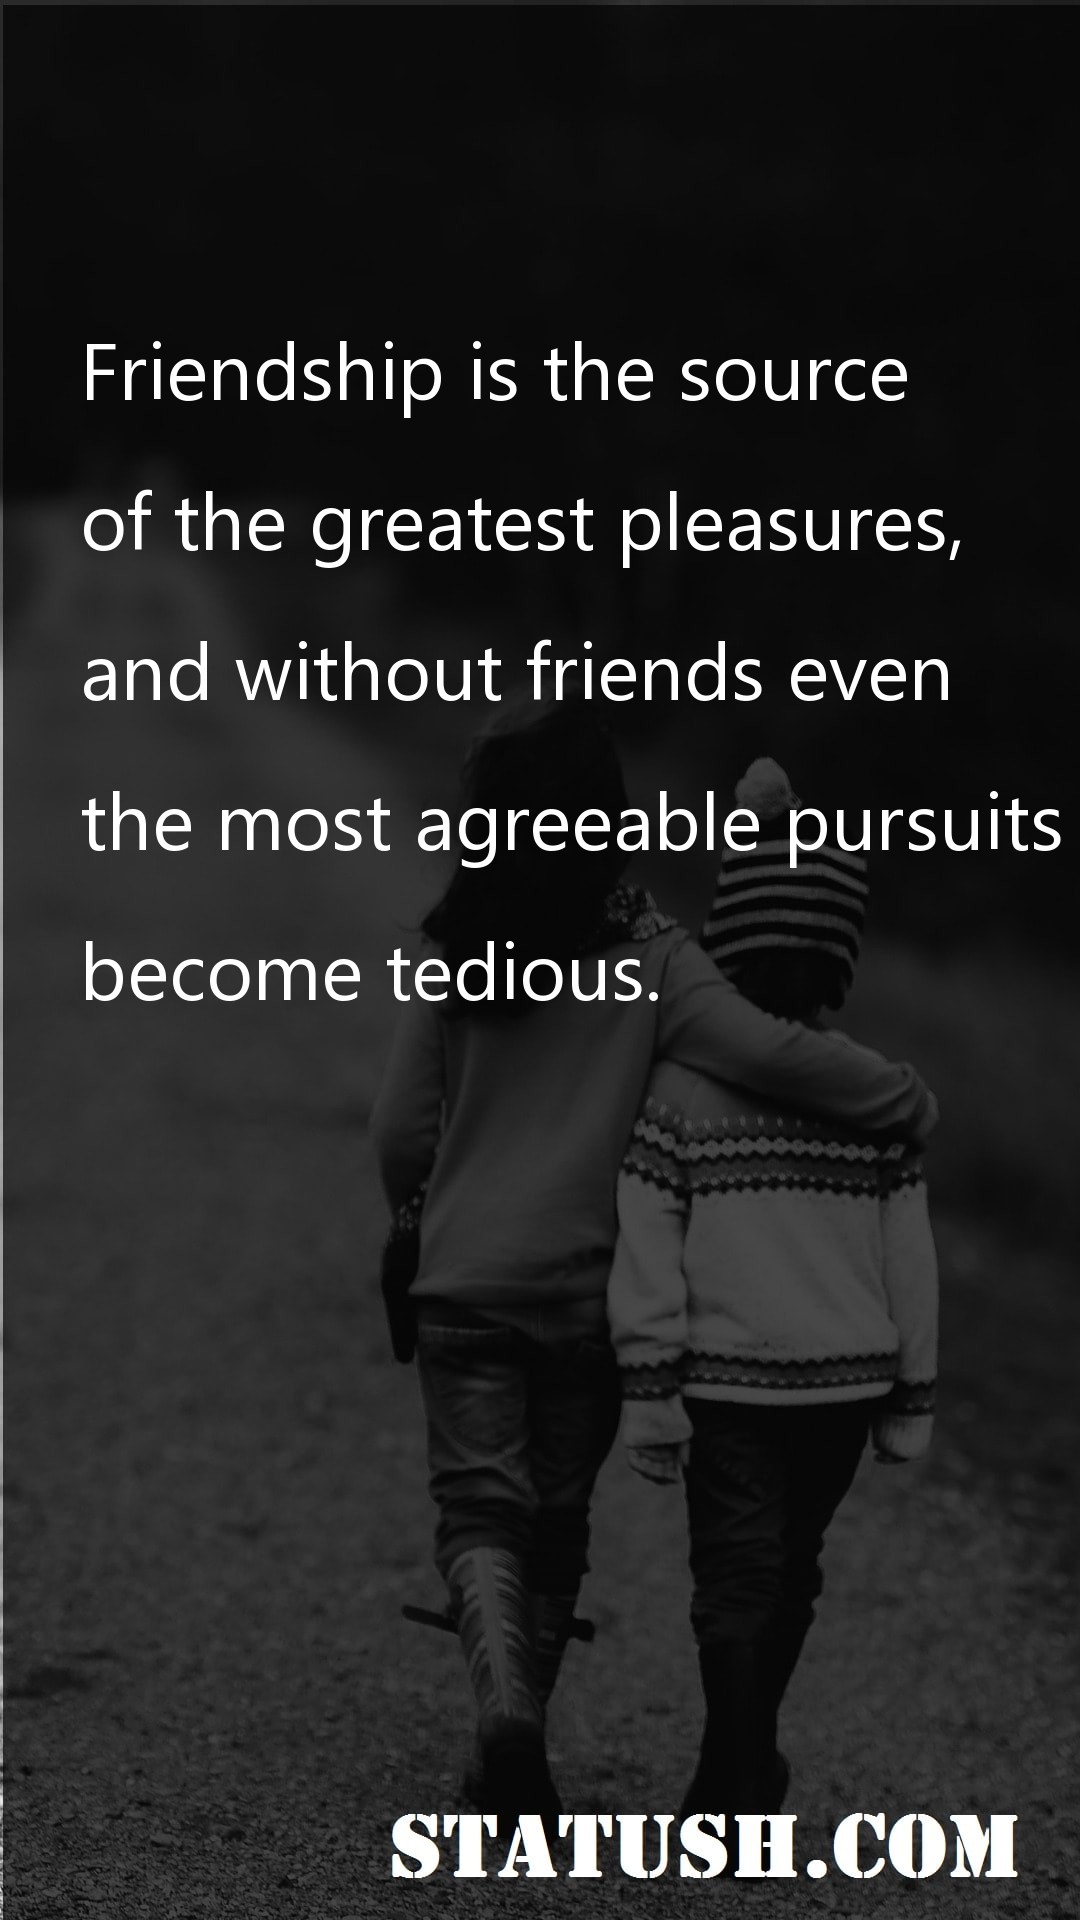 Friendship is the source - Friendship Quotes at statush.com